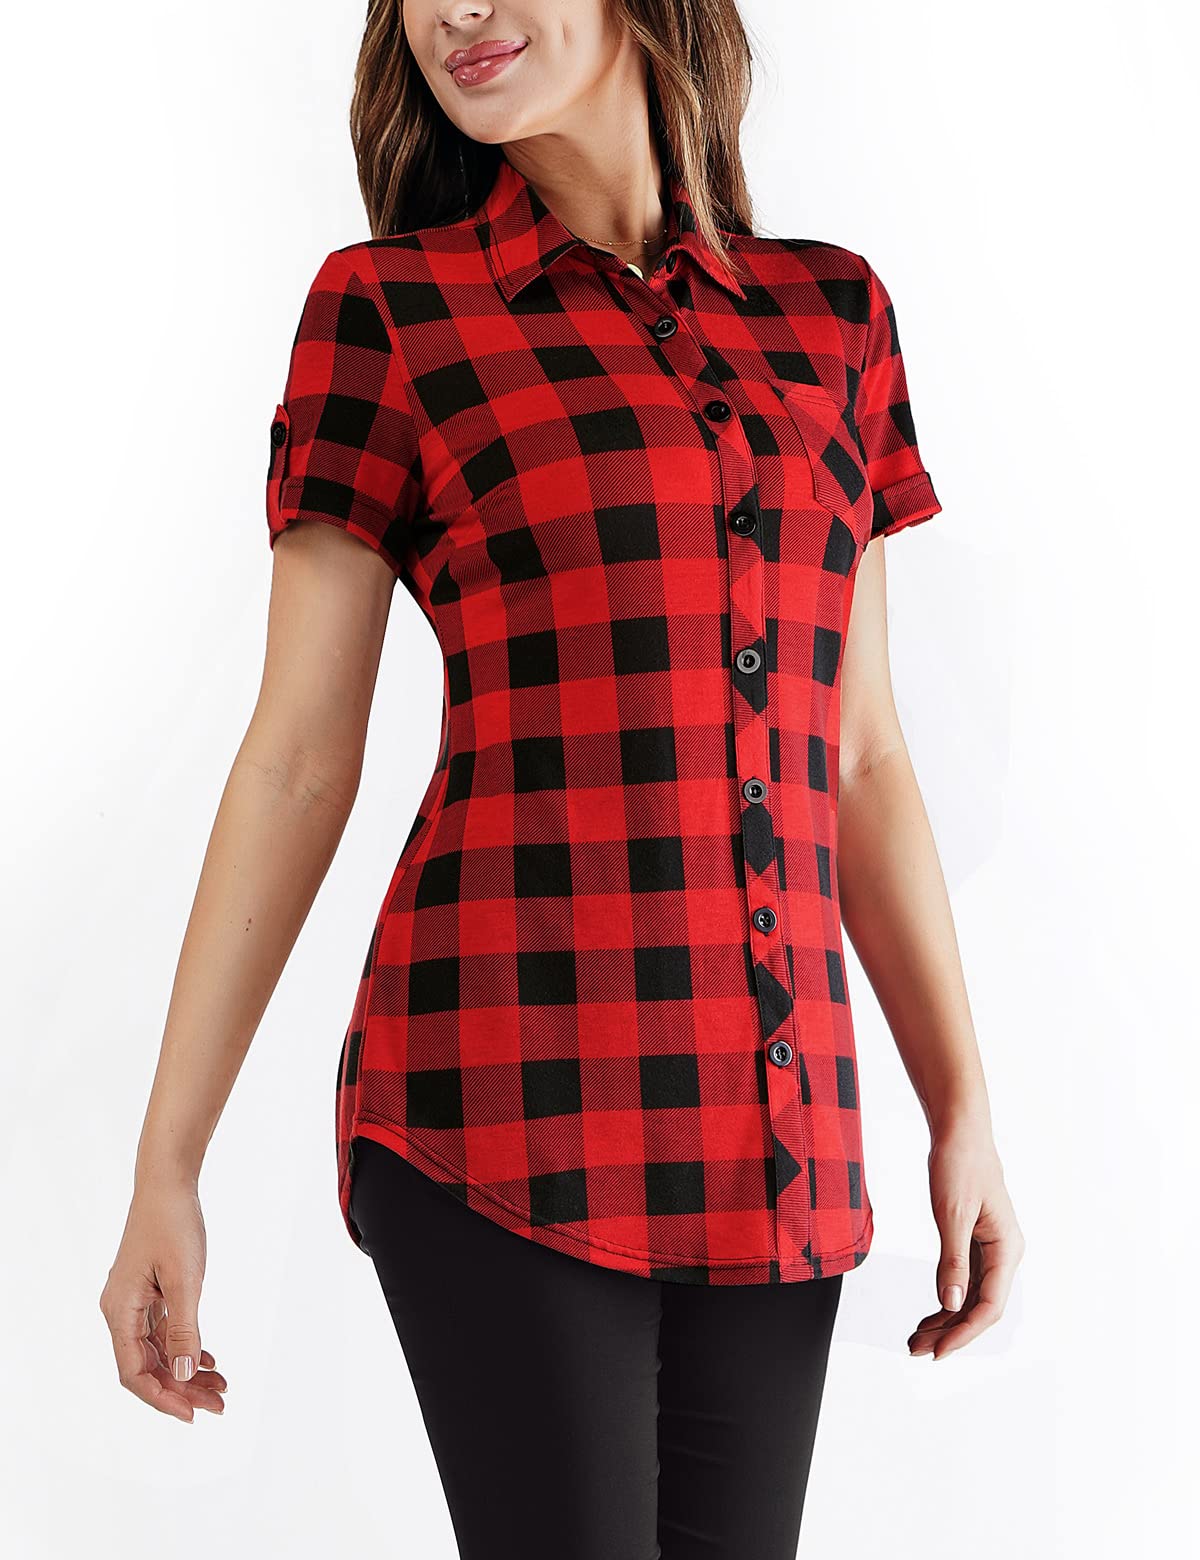 DJT Roll Up Long Sleeve Red Plaid Women’s Sleeve Collared Button Down Plaid Shirt